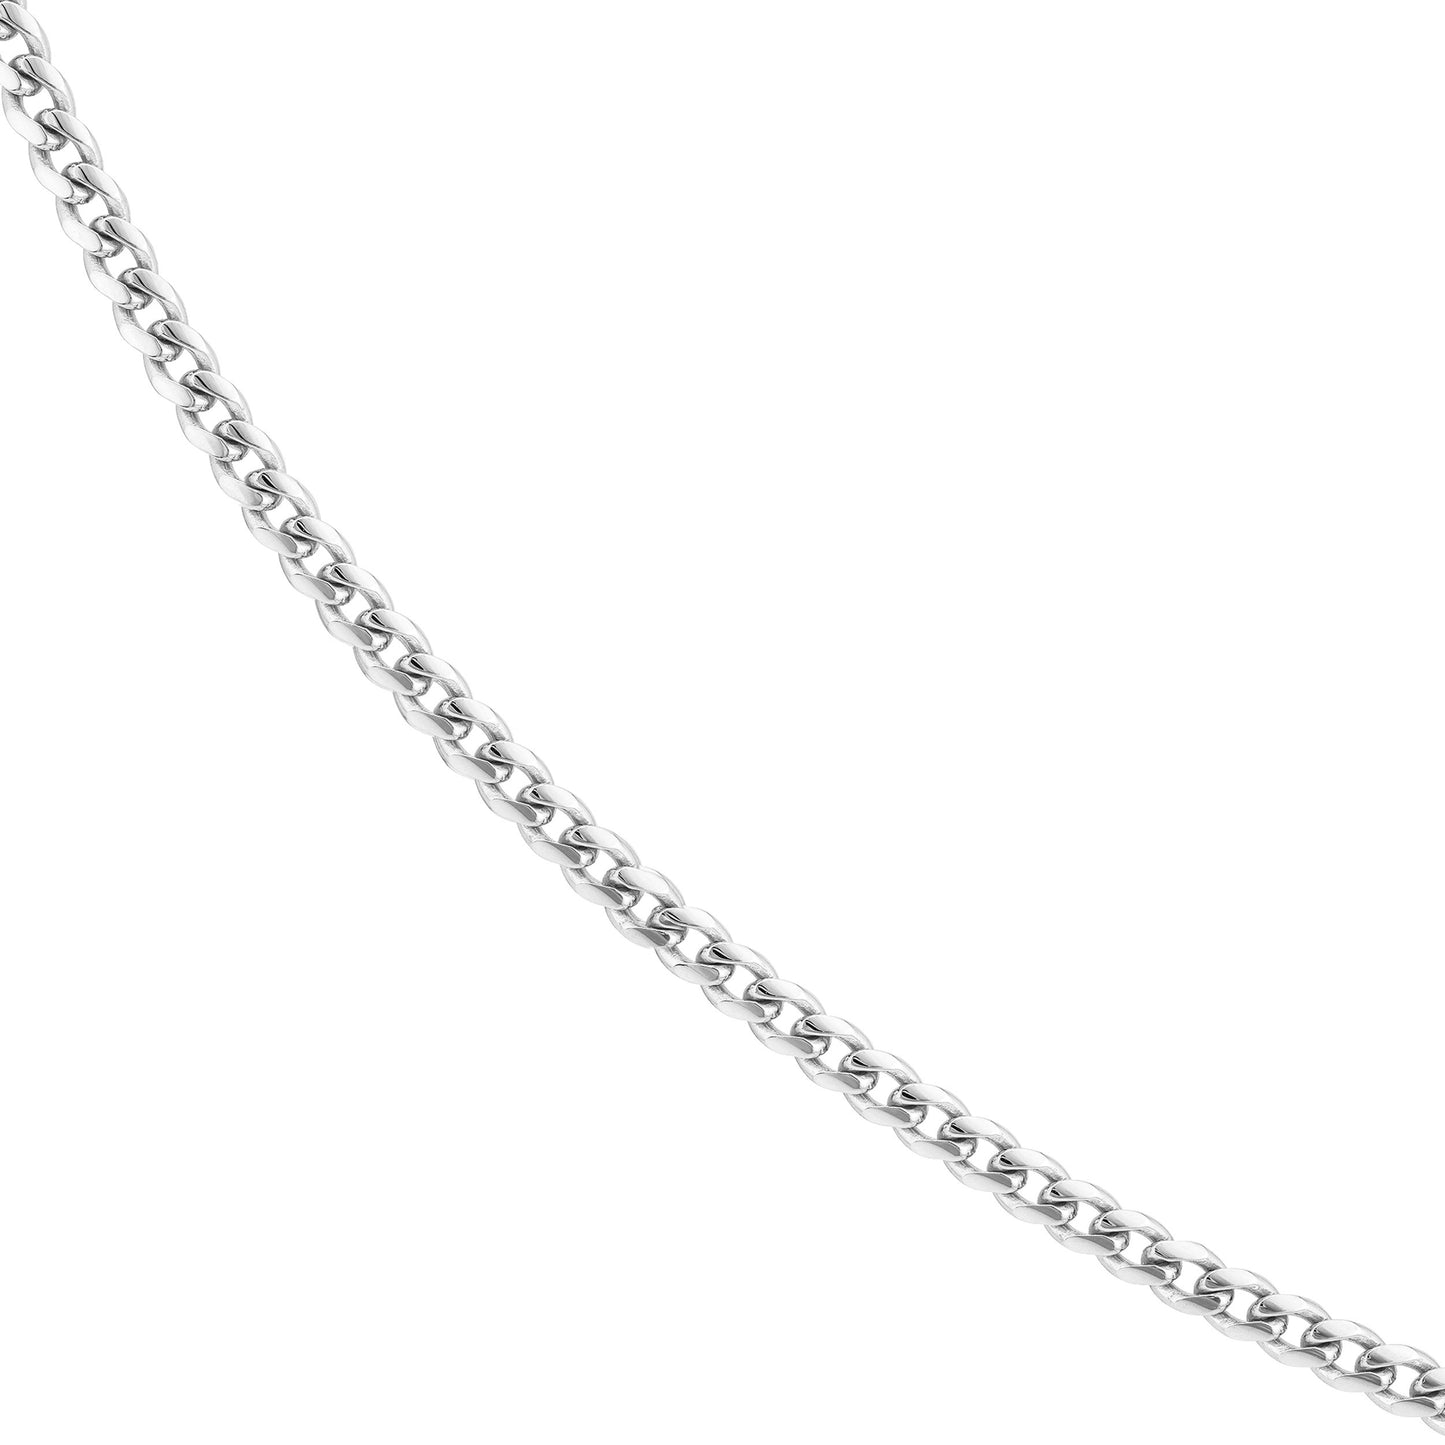 Sterling Silver Miami Cuban Chain Link Necklace, 24 Inches, 5mm